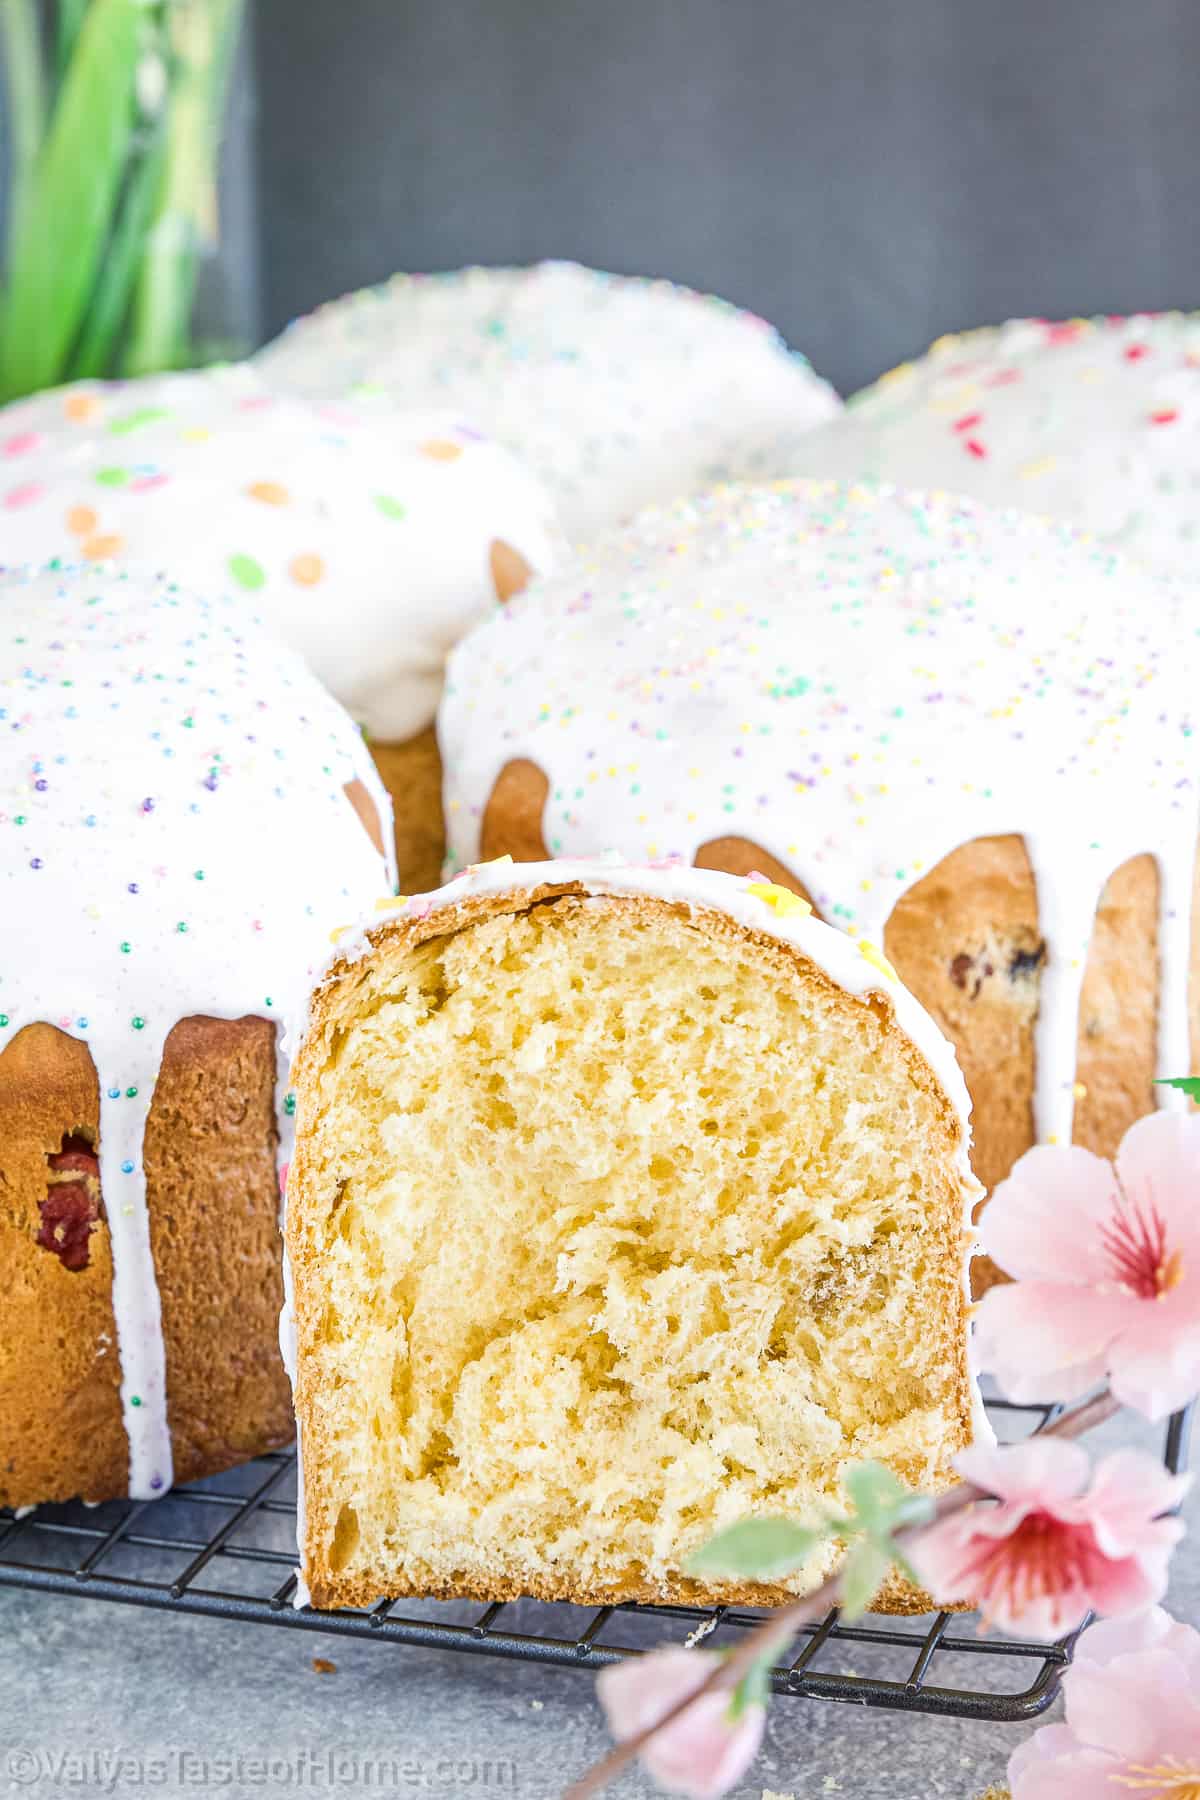 This Easter bread is a staple at our family's celebrations. Its light, fluffy texture and just the right level of sweetness make it a hit with both the young and old at our Easter gatherings.